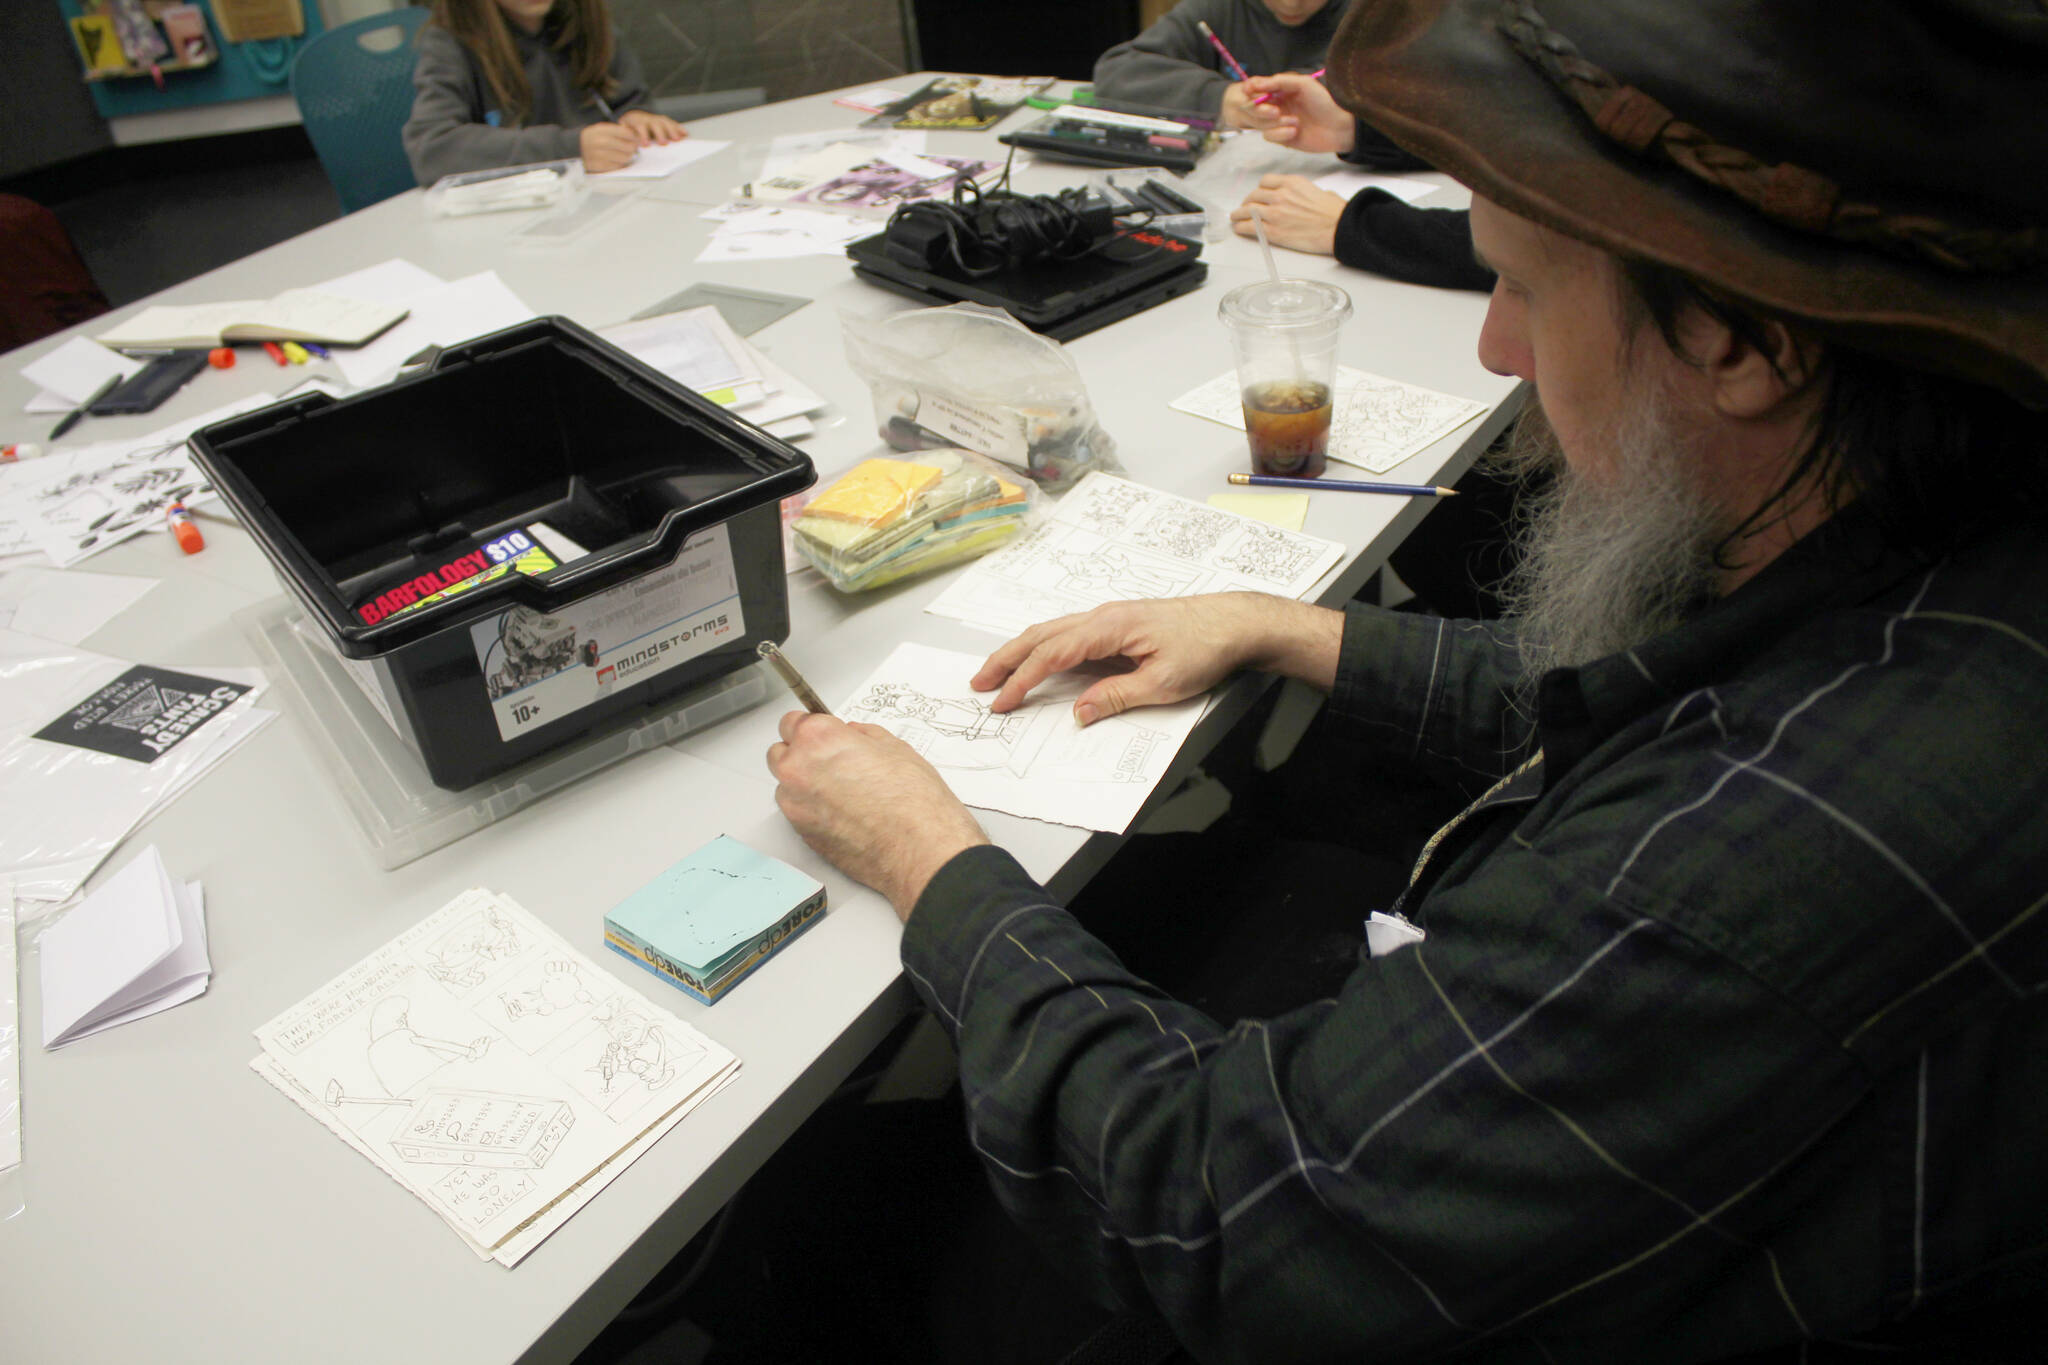 Alex Poorman works on a comic book during the zine class that he started creating during ComiCon last year. Photo by Keelin Everly-Lang / The Mirror